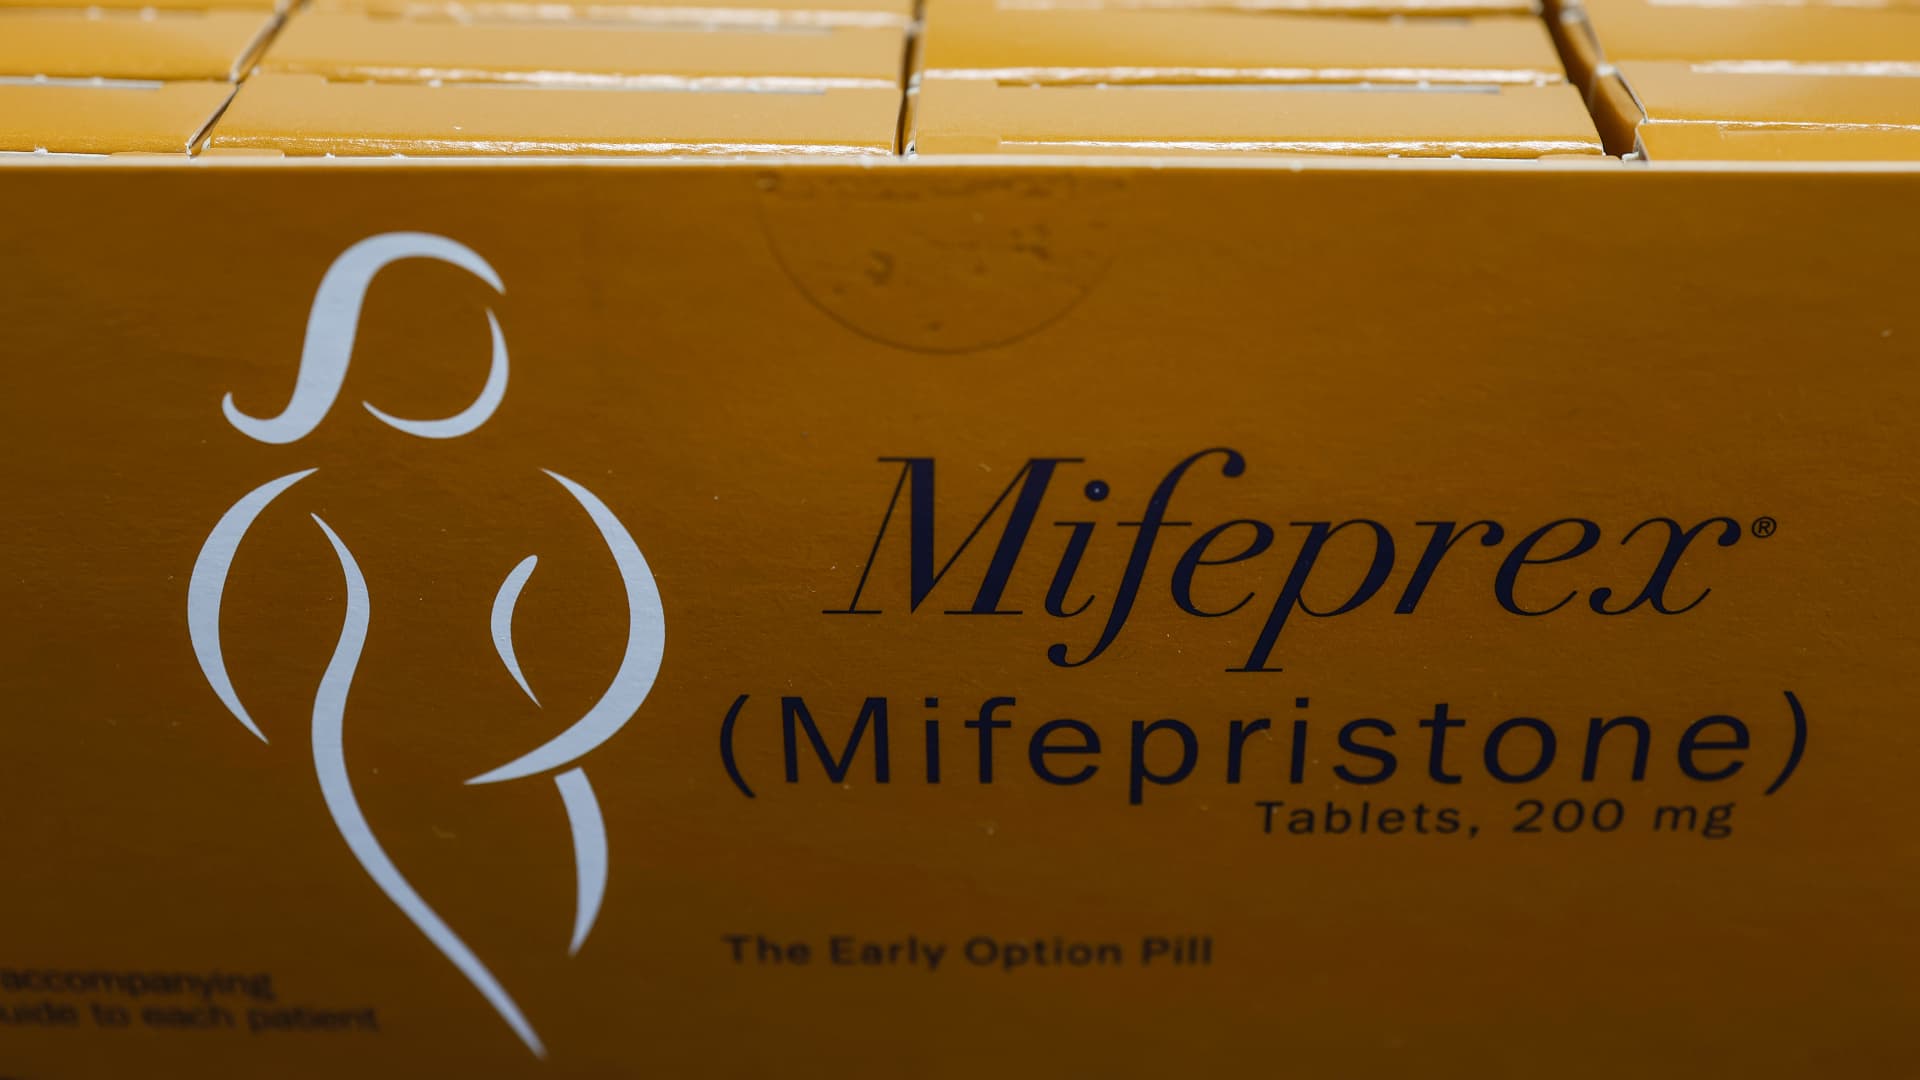 Abortion pill mifepristone is banned or restricted in some states despite Supreme Court ruling